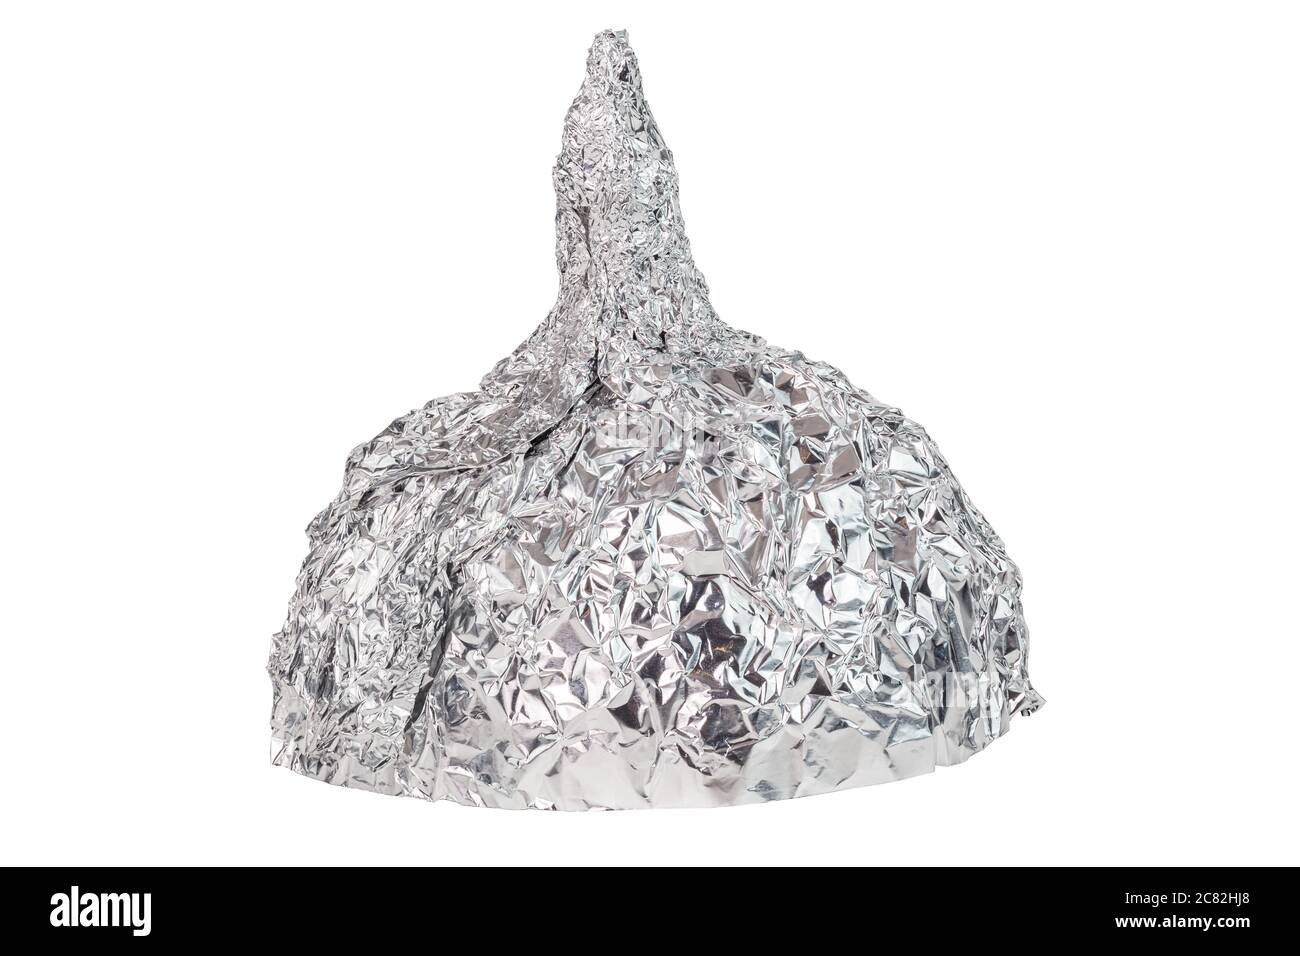 https://c8.alamy.com/comp/2C82HJ8/aluminium-foil-hat-isolated-on-white-background-symbol-for-conspiracy-theory-and-mind-control-protection-2C82HJ8.jpg